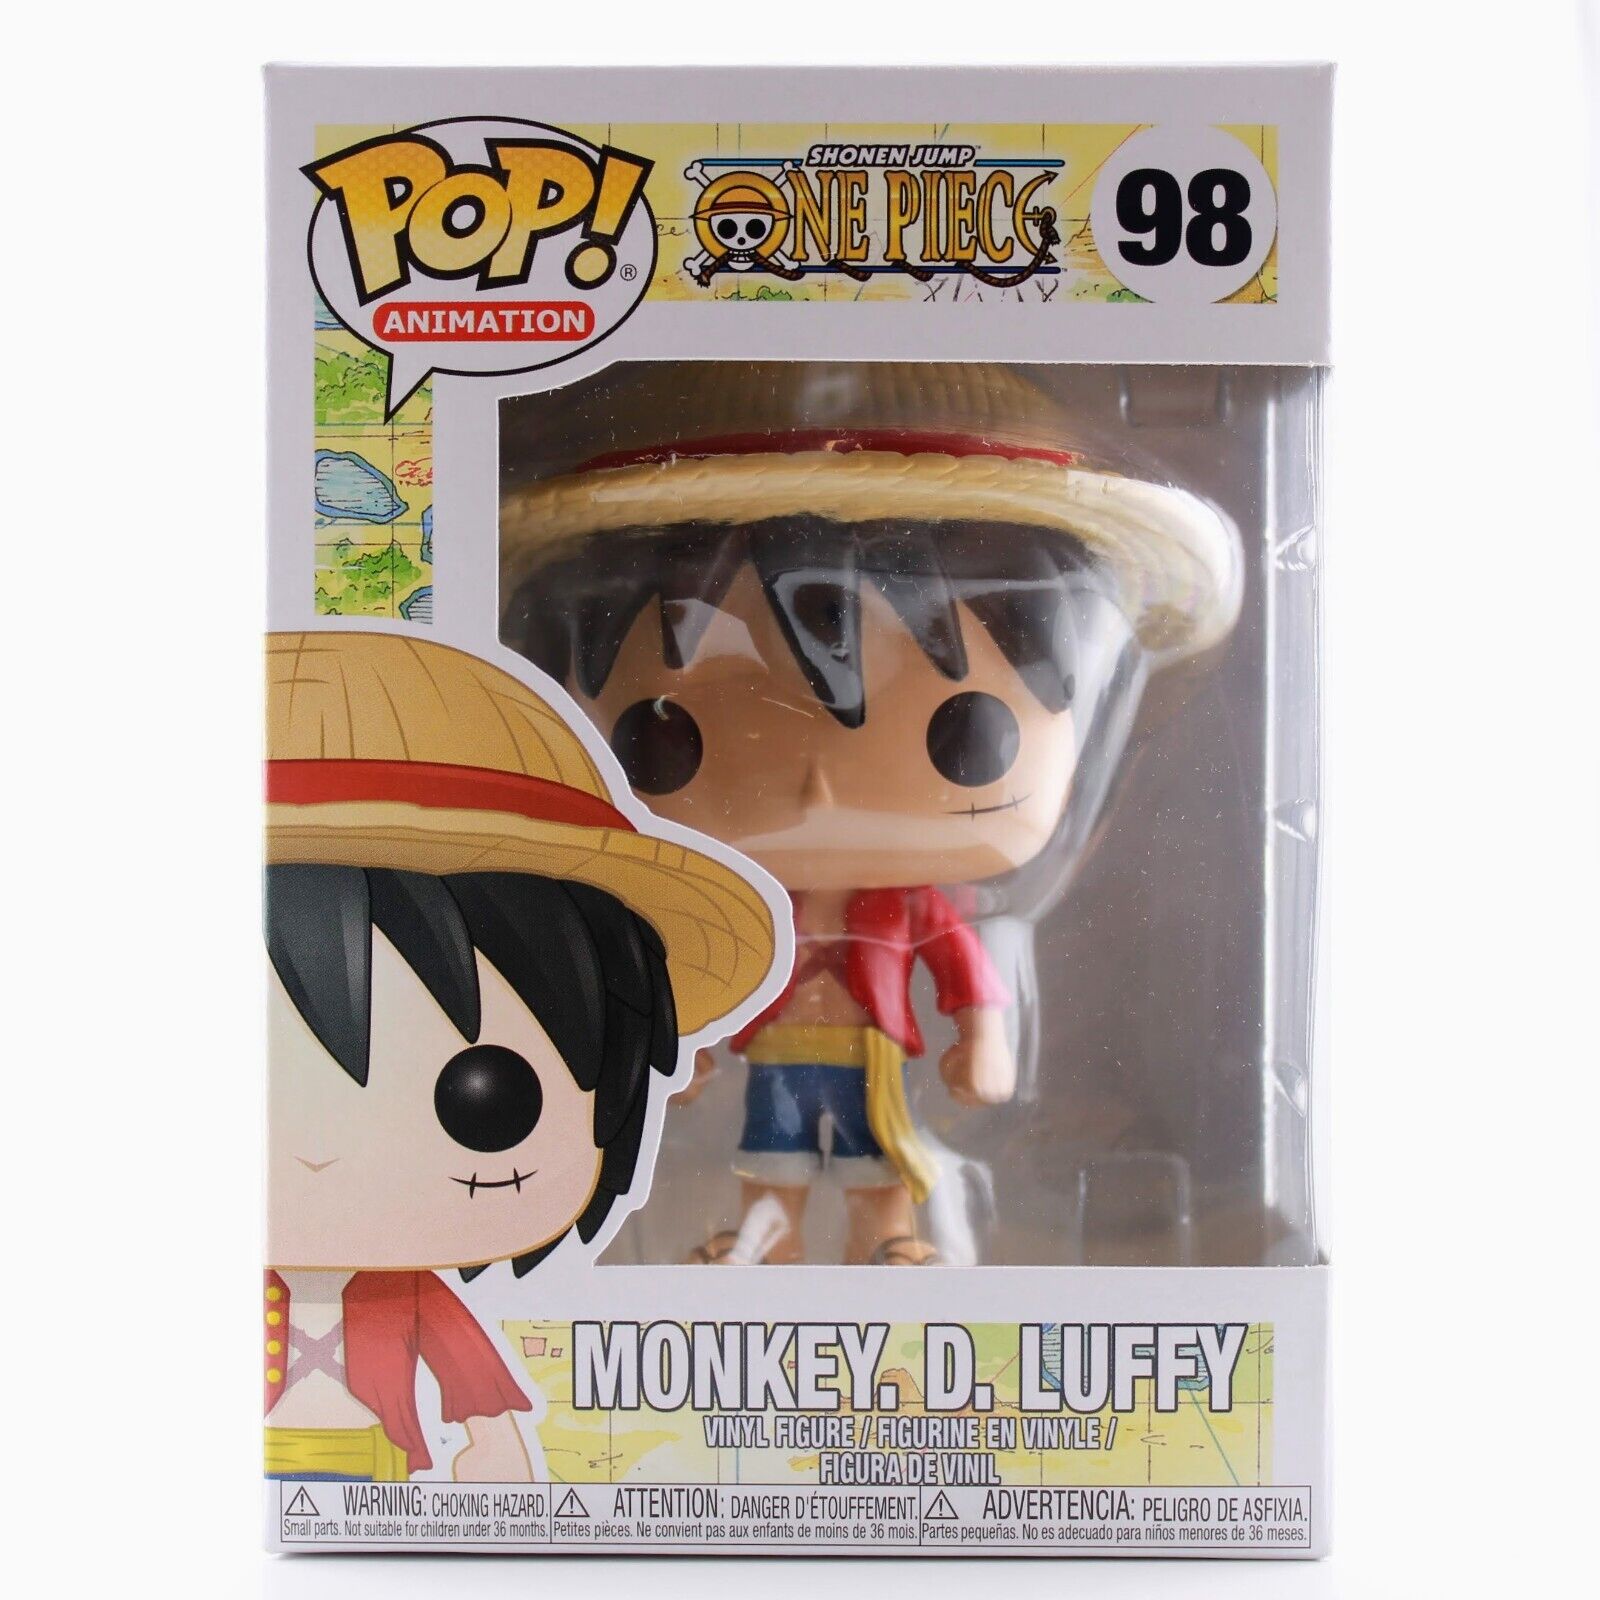 Funko Pop! Animation Poster One Piece Monkey D. Luffy Fall Convention  Exclusive Figure #1459 - US